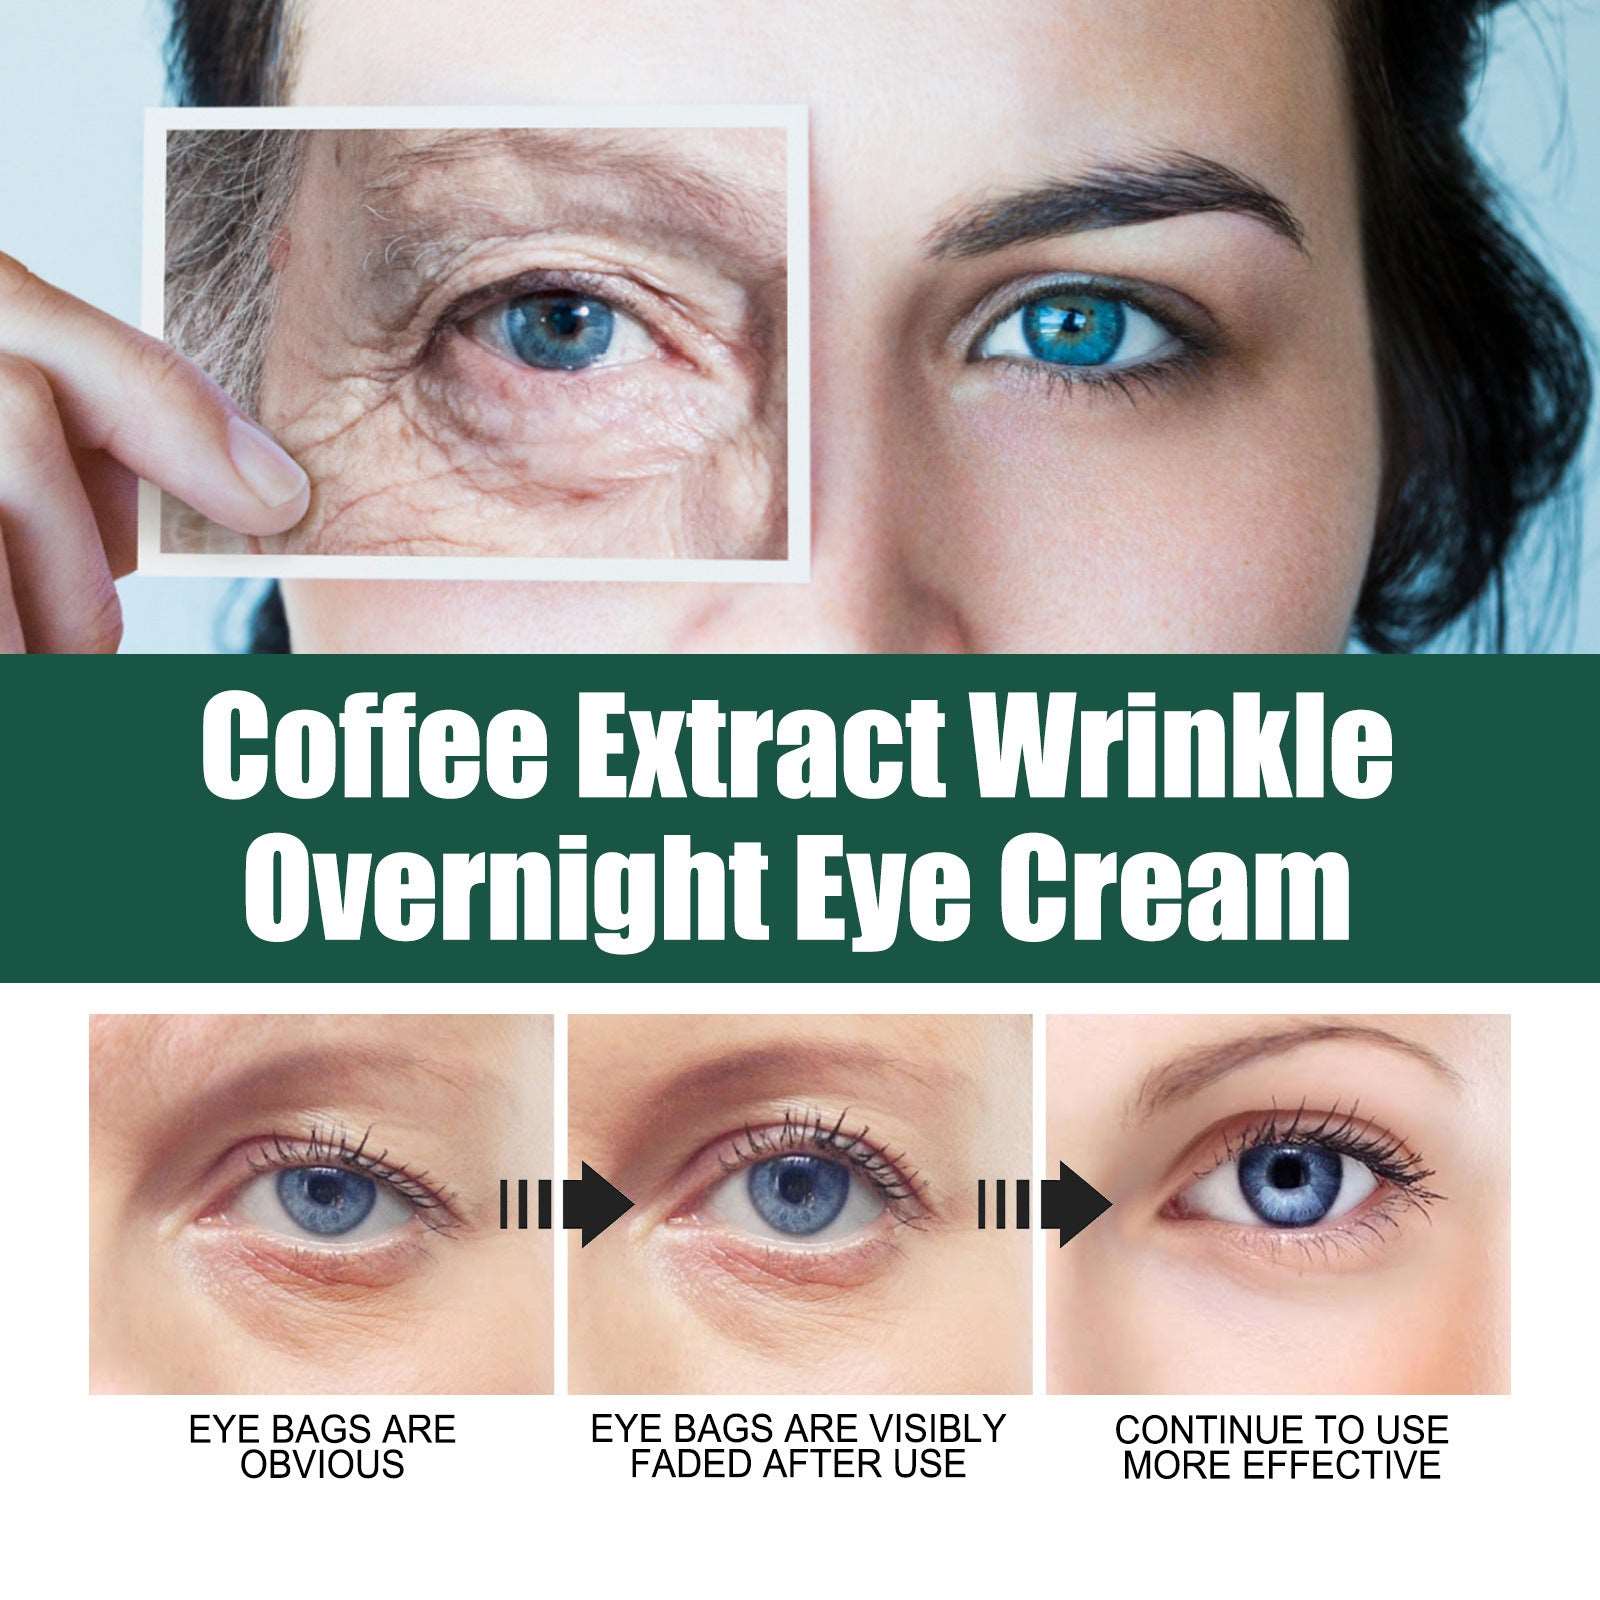 Advertisement for Cordyceps Eye Cream Fade Bags And Dark Circle Fine Lines from Sweet Deals, showcasing before and after images of eye bags treatment, highlighting the visible reduction in wrinkles and eye bags.